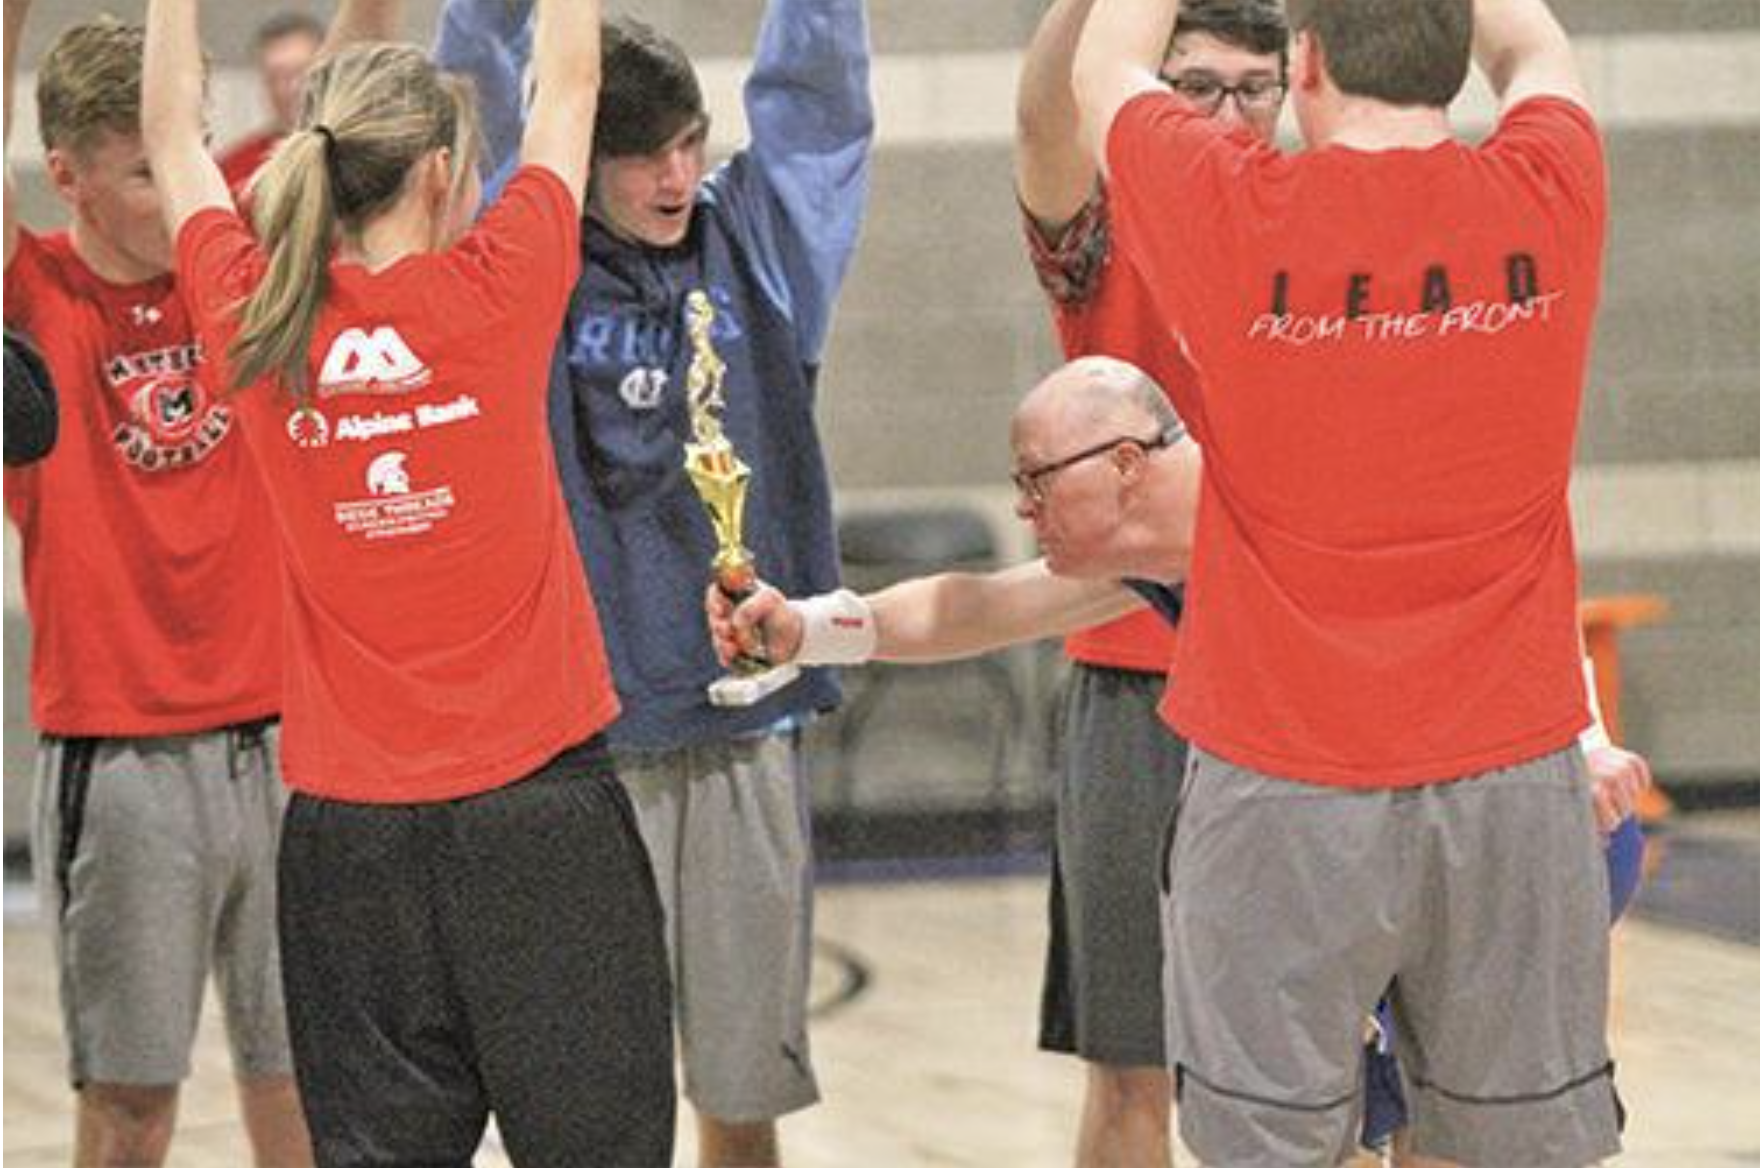 Montrose Hot Shots vs. MHS: Charity Basketball Game for a Cause